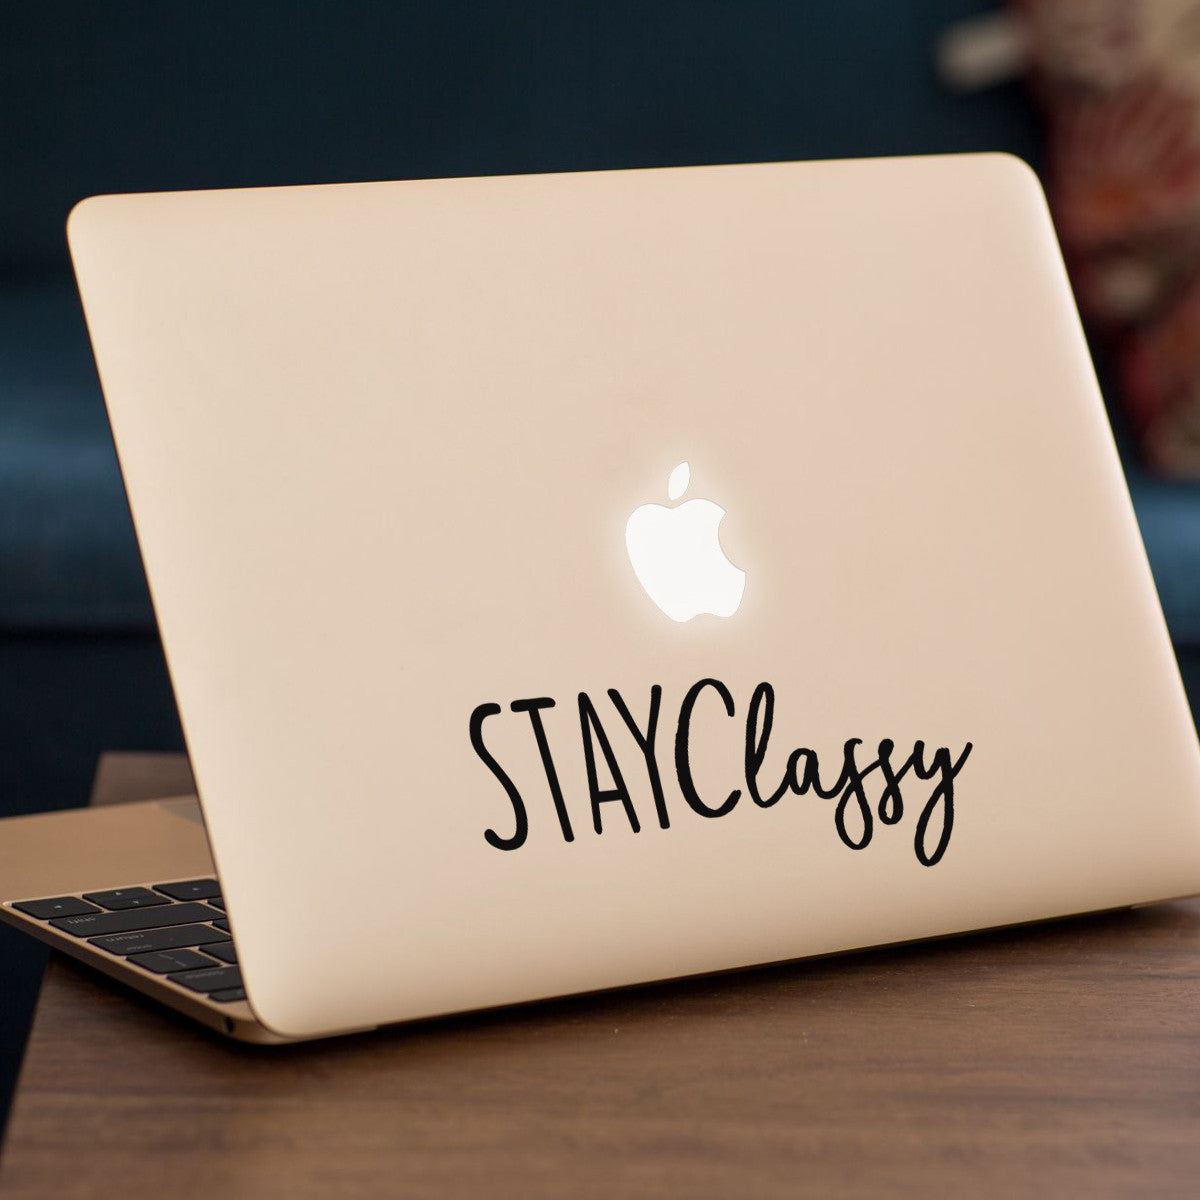 Stay Classy Macbook Decal